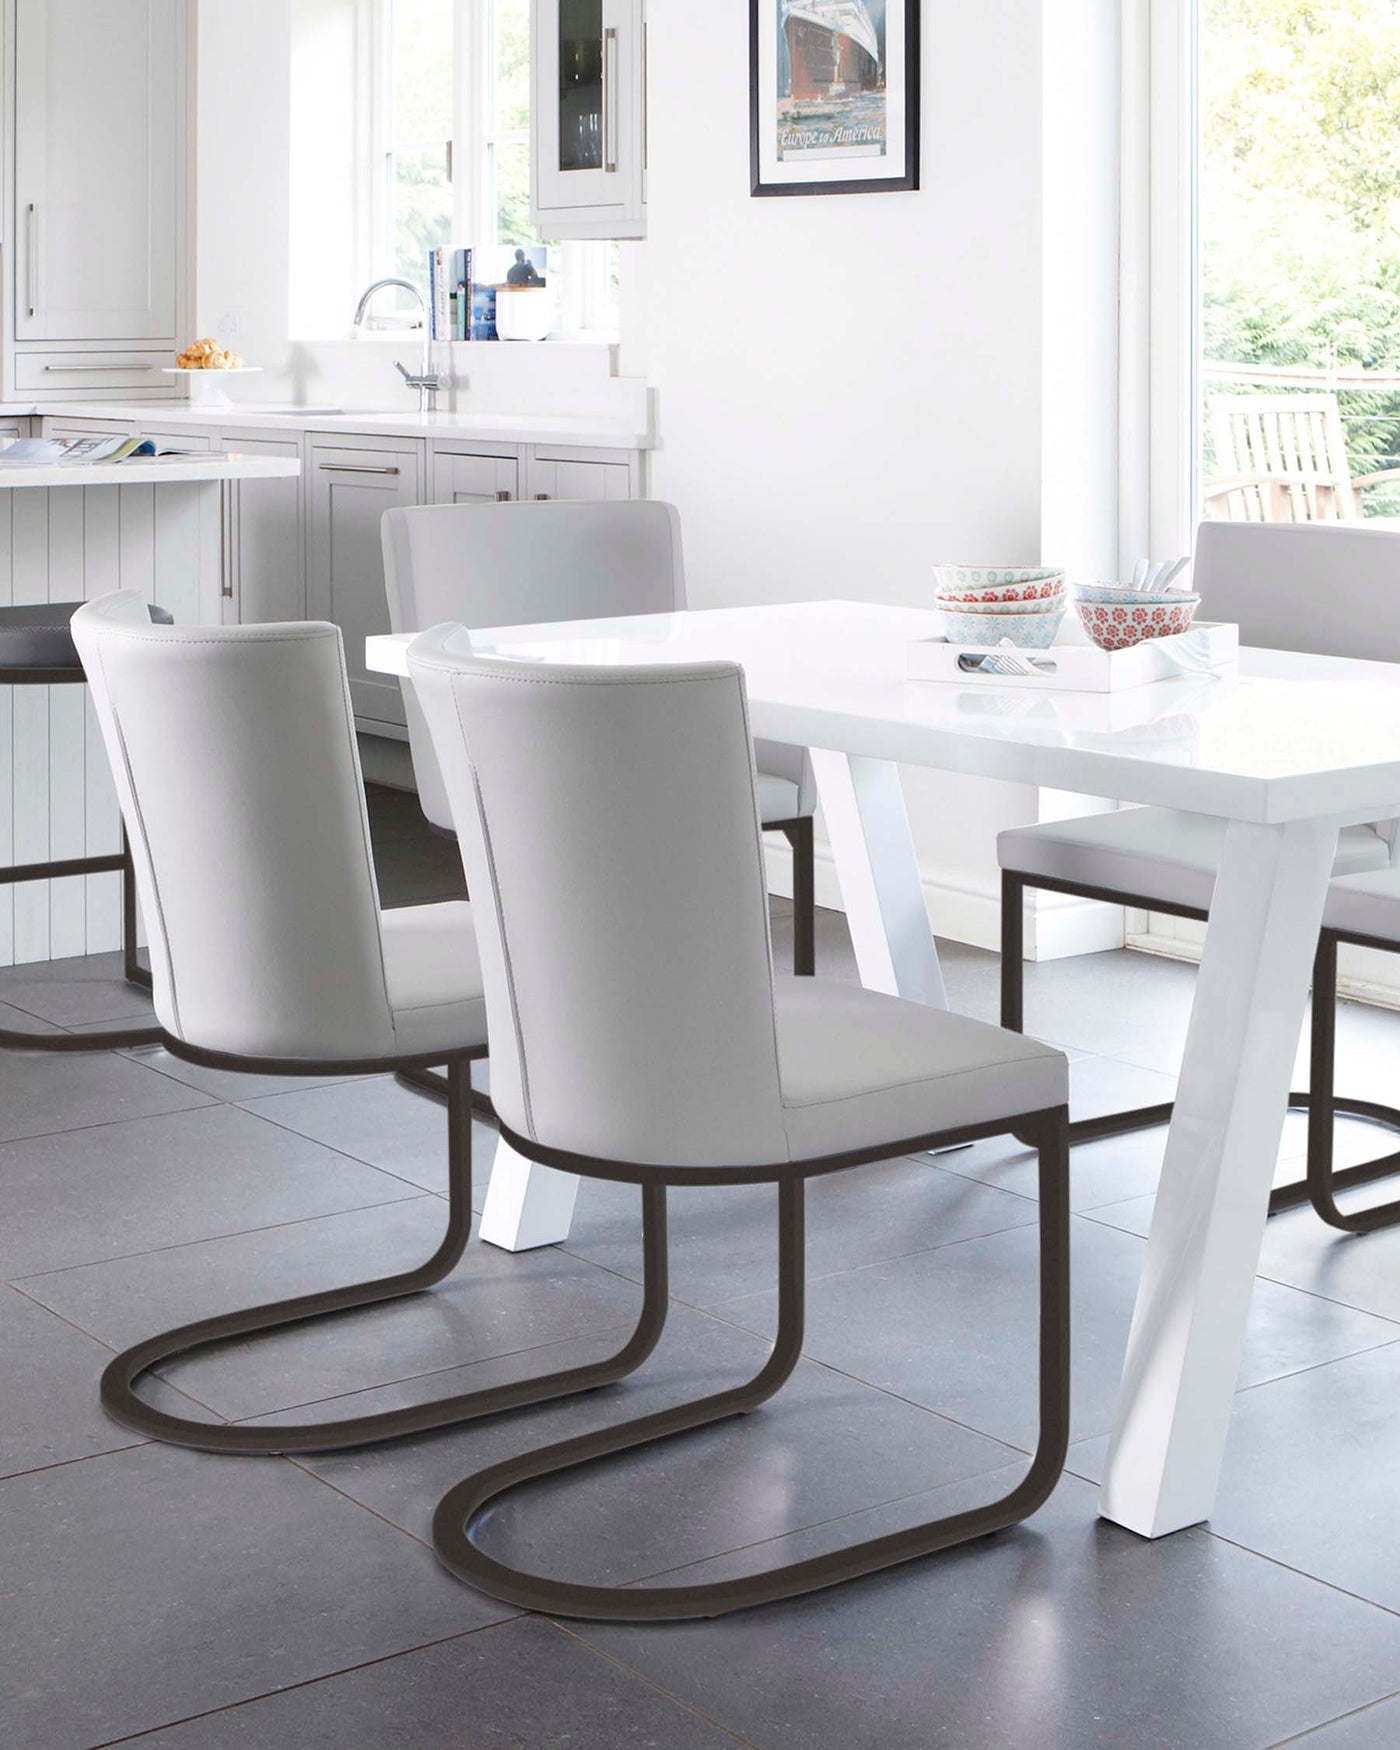 A modern dining set featuring a white rectangular table with a glossy finish and sturdy square legs, paired with three light grey cantilever dining chairs that have high backs and are upholstered for comfort. The chairs' unique base design in a dark metallic finish provides a sleek, floating appearance. The setting is a bright dining room with natural light.